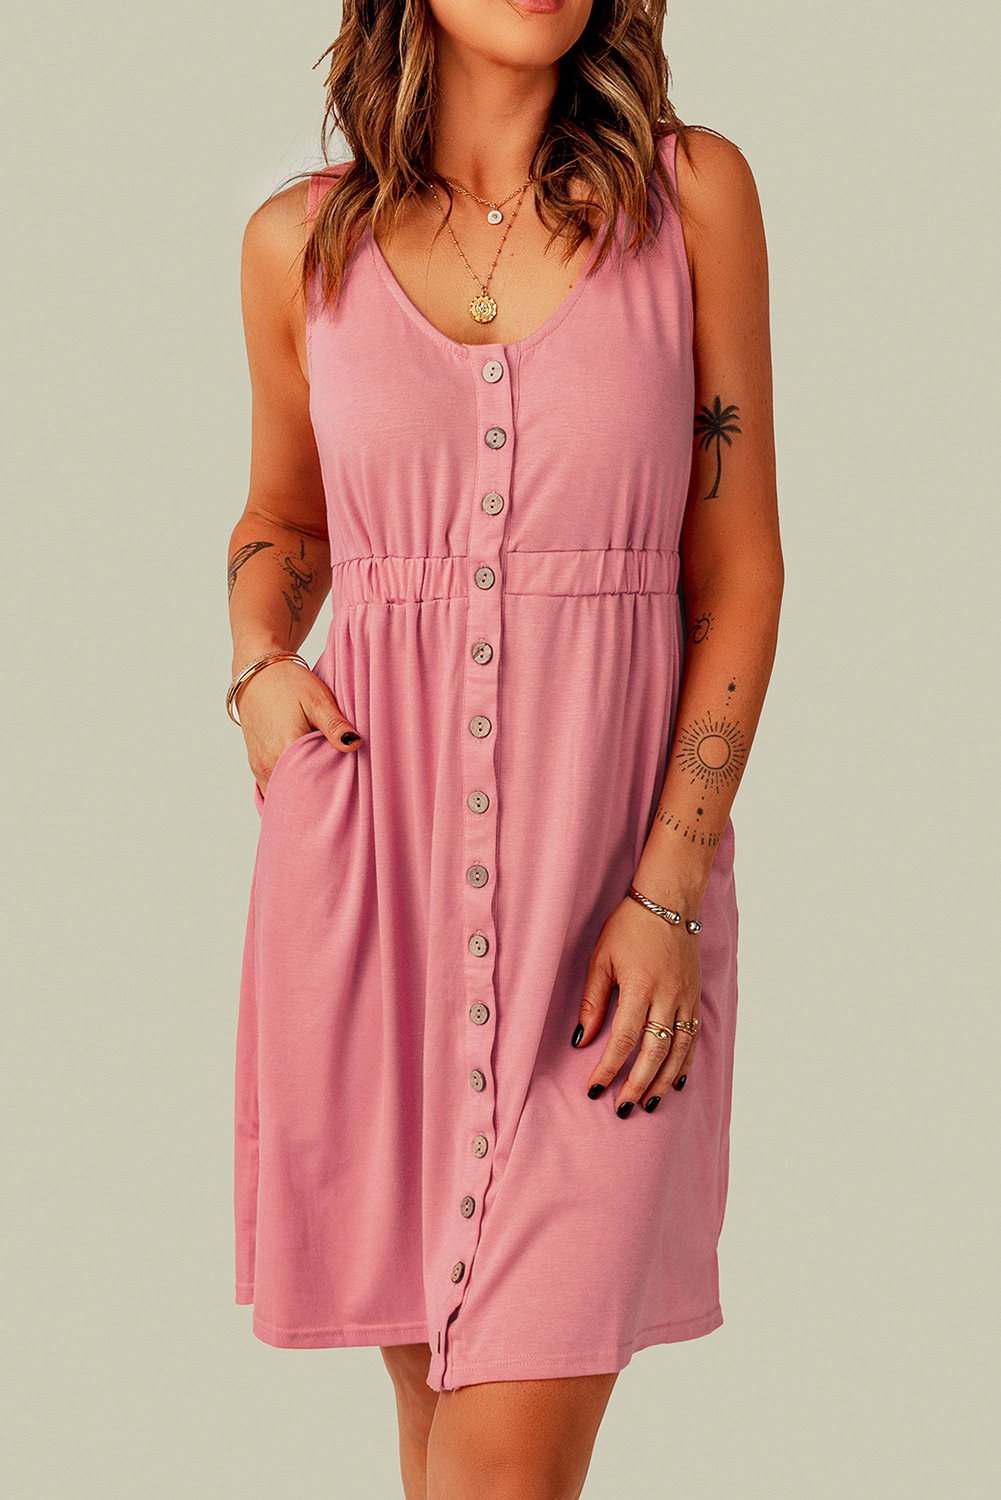 Wholesale Pink Casual Button Front Shirred Waist Tank SUMMER DRESS 